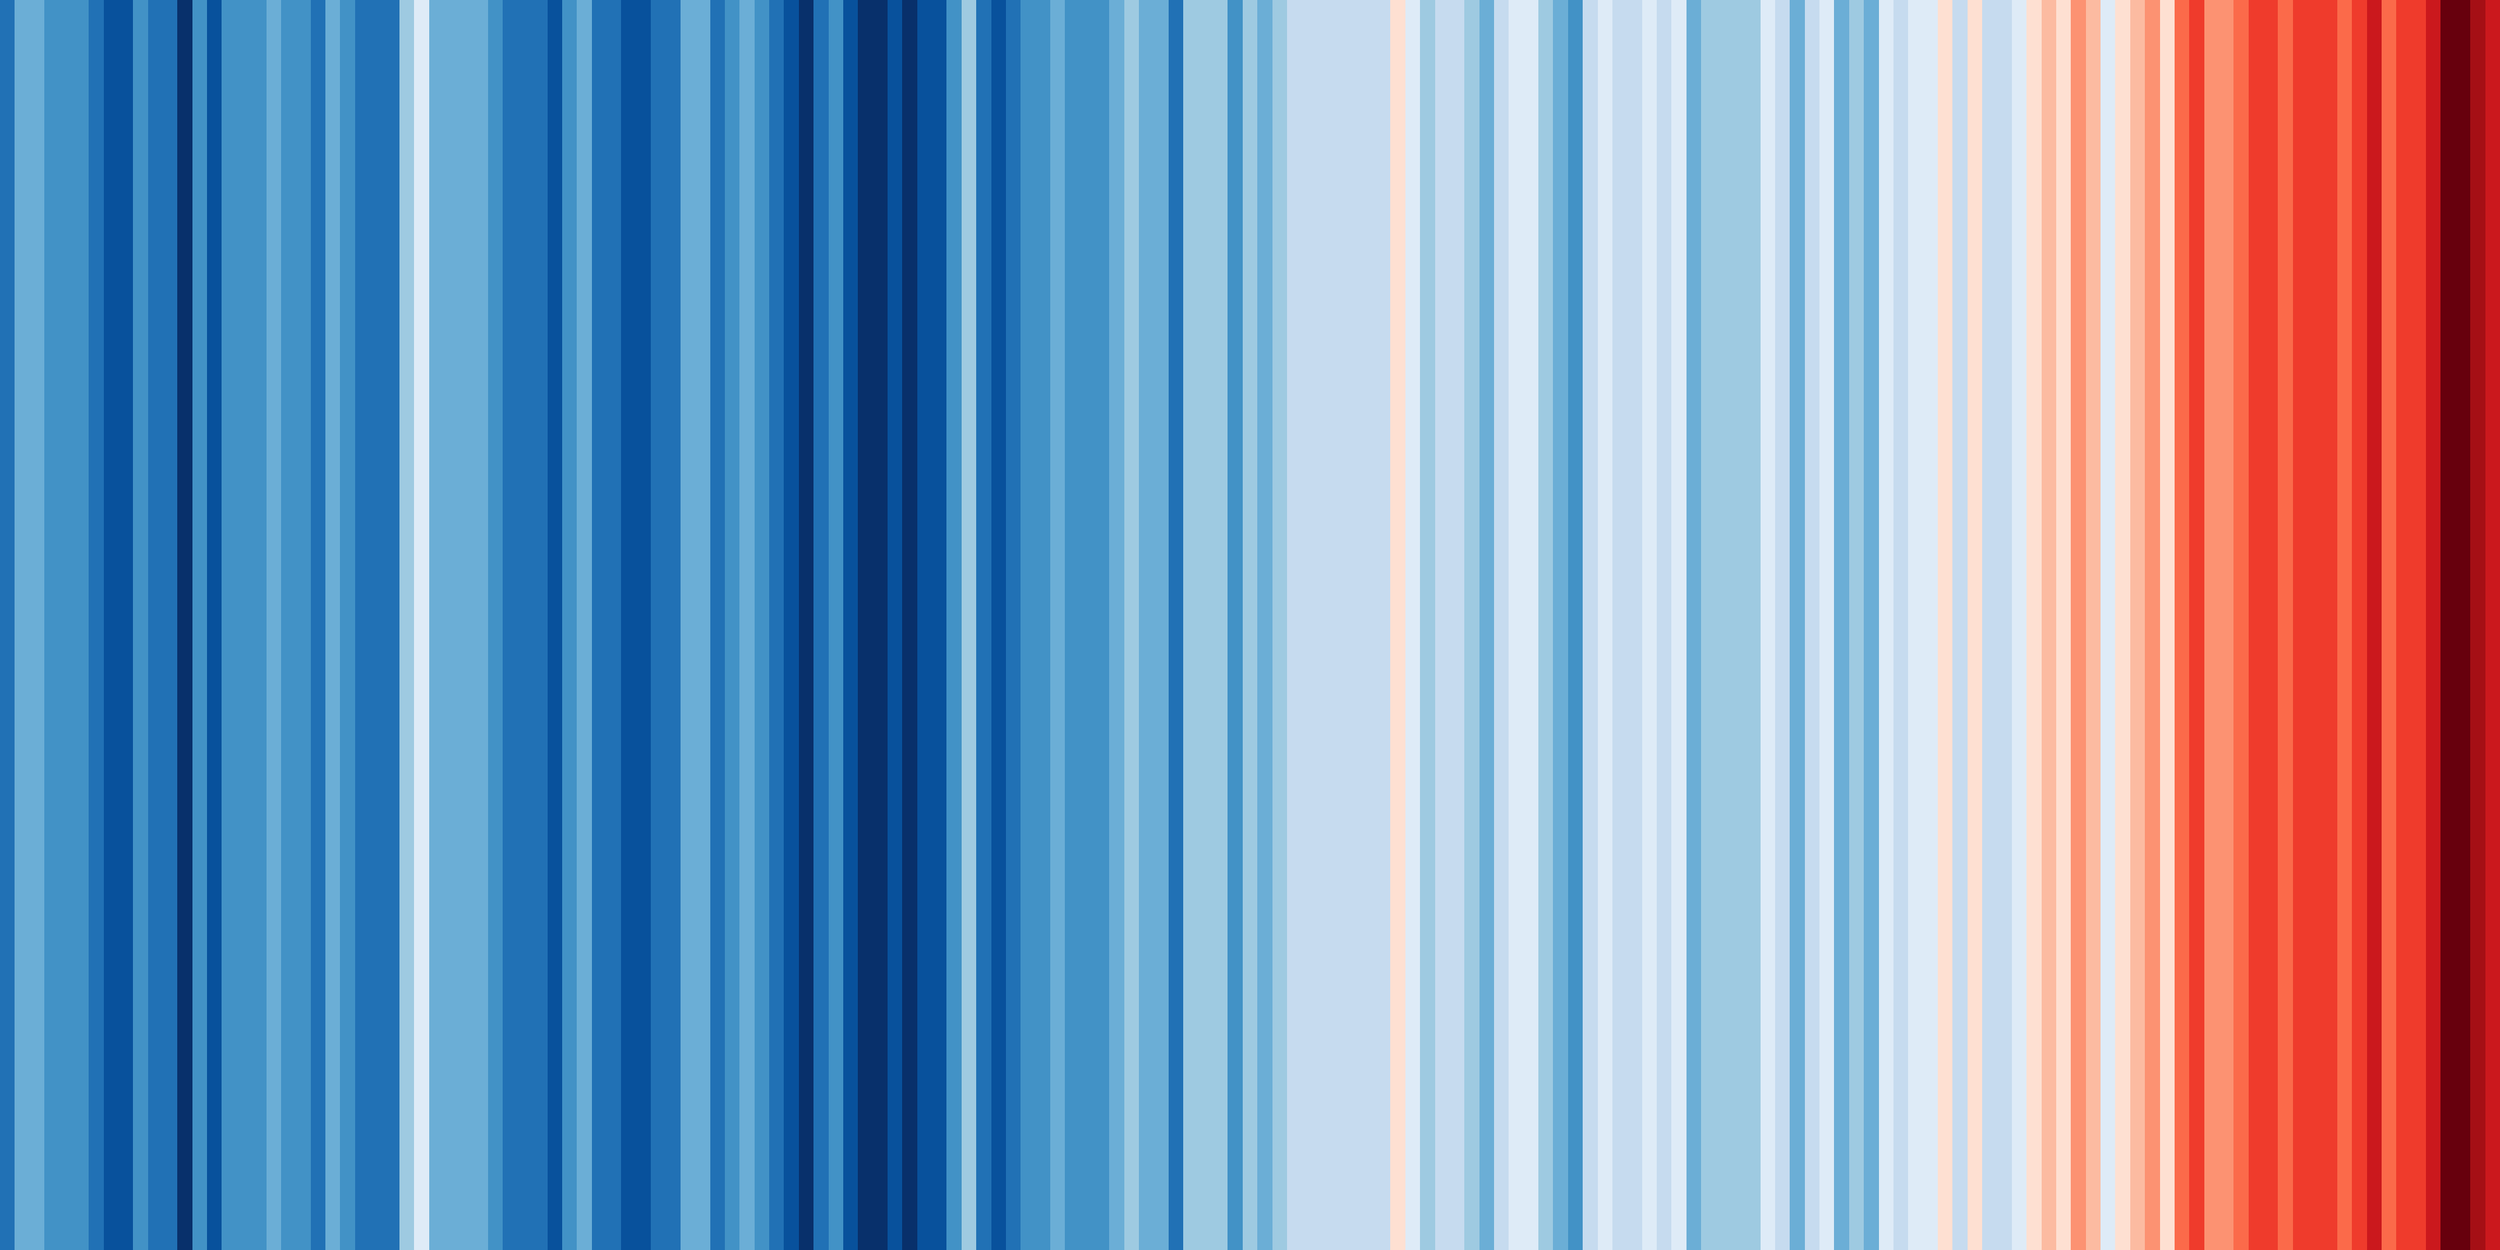  Warming stripes for the globe from 1850-2018 